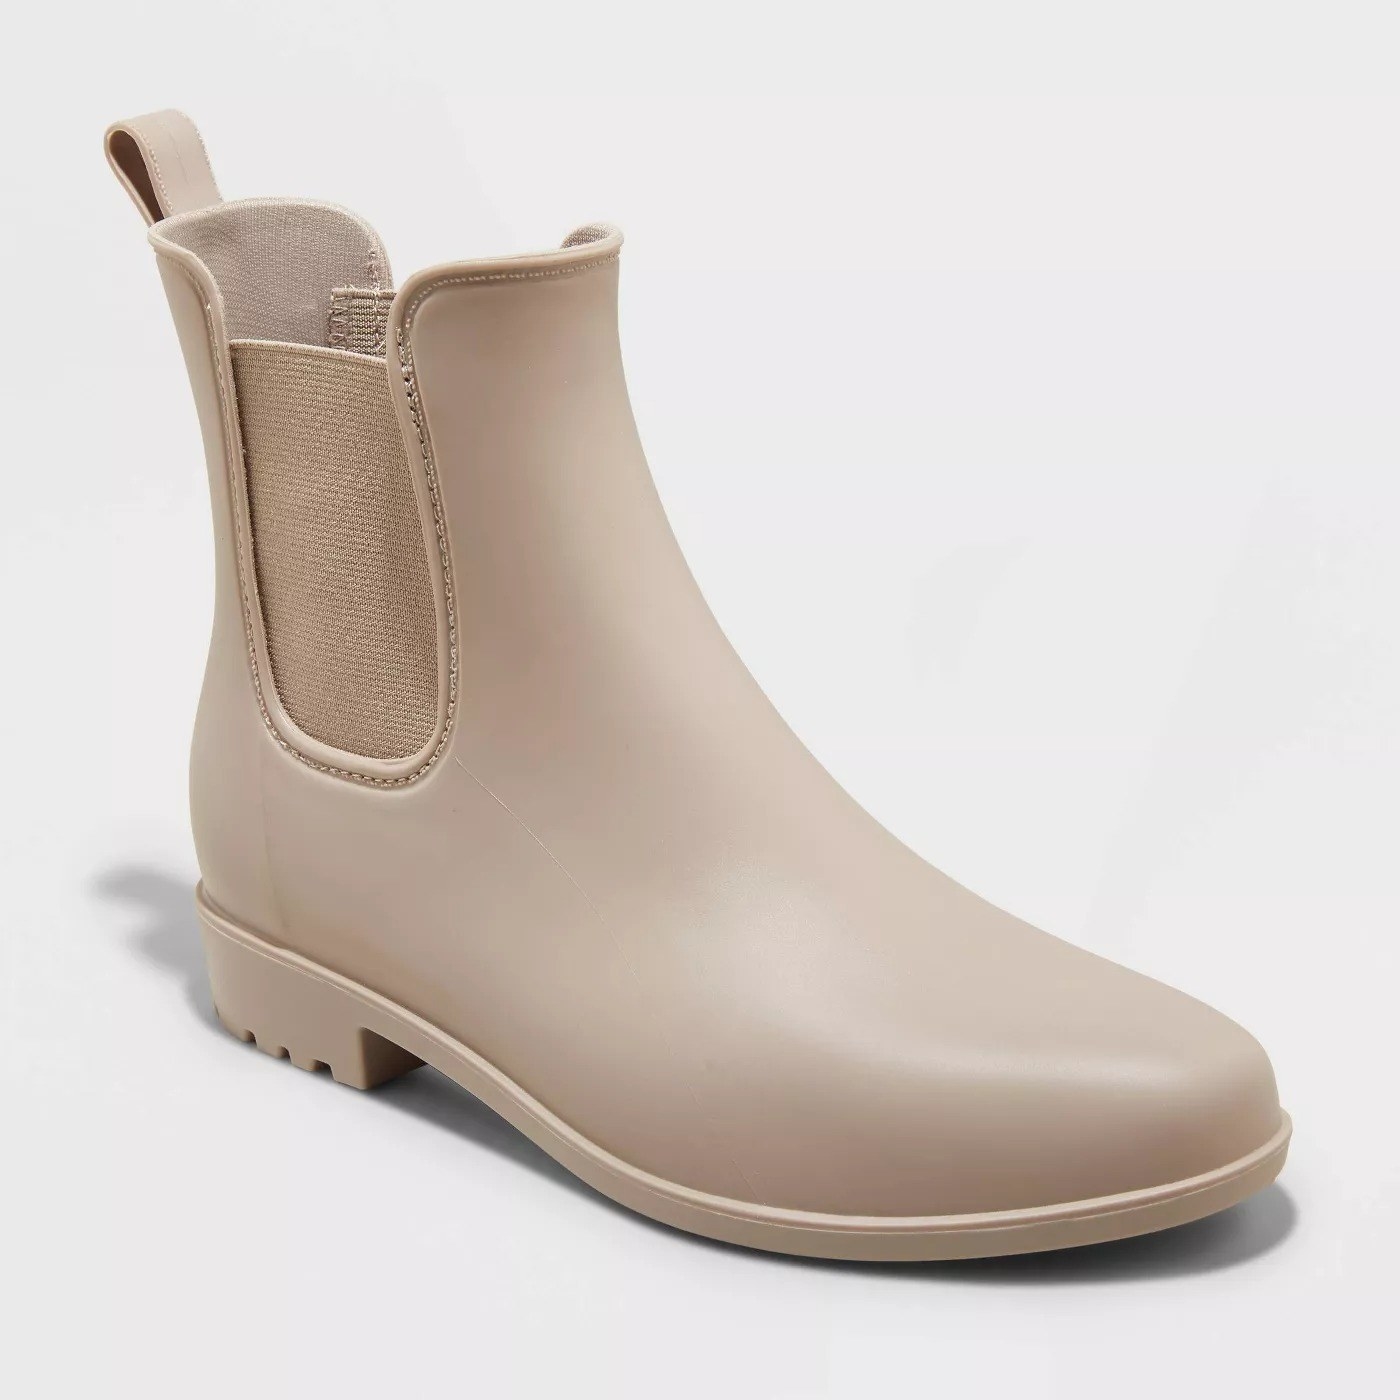 The bone colored boot with bone colored heel